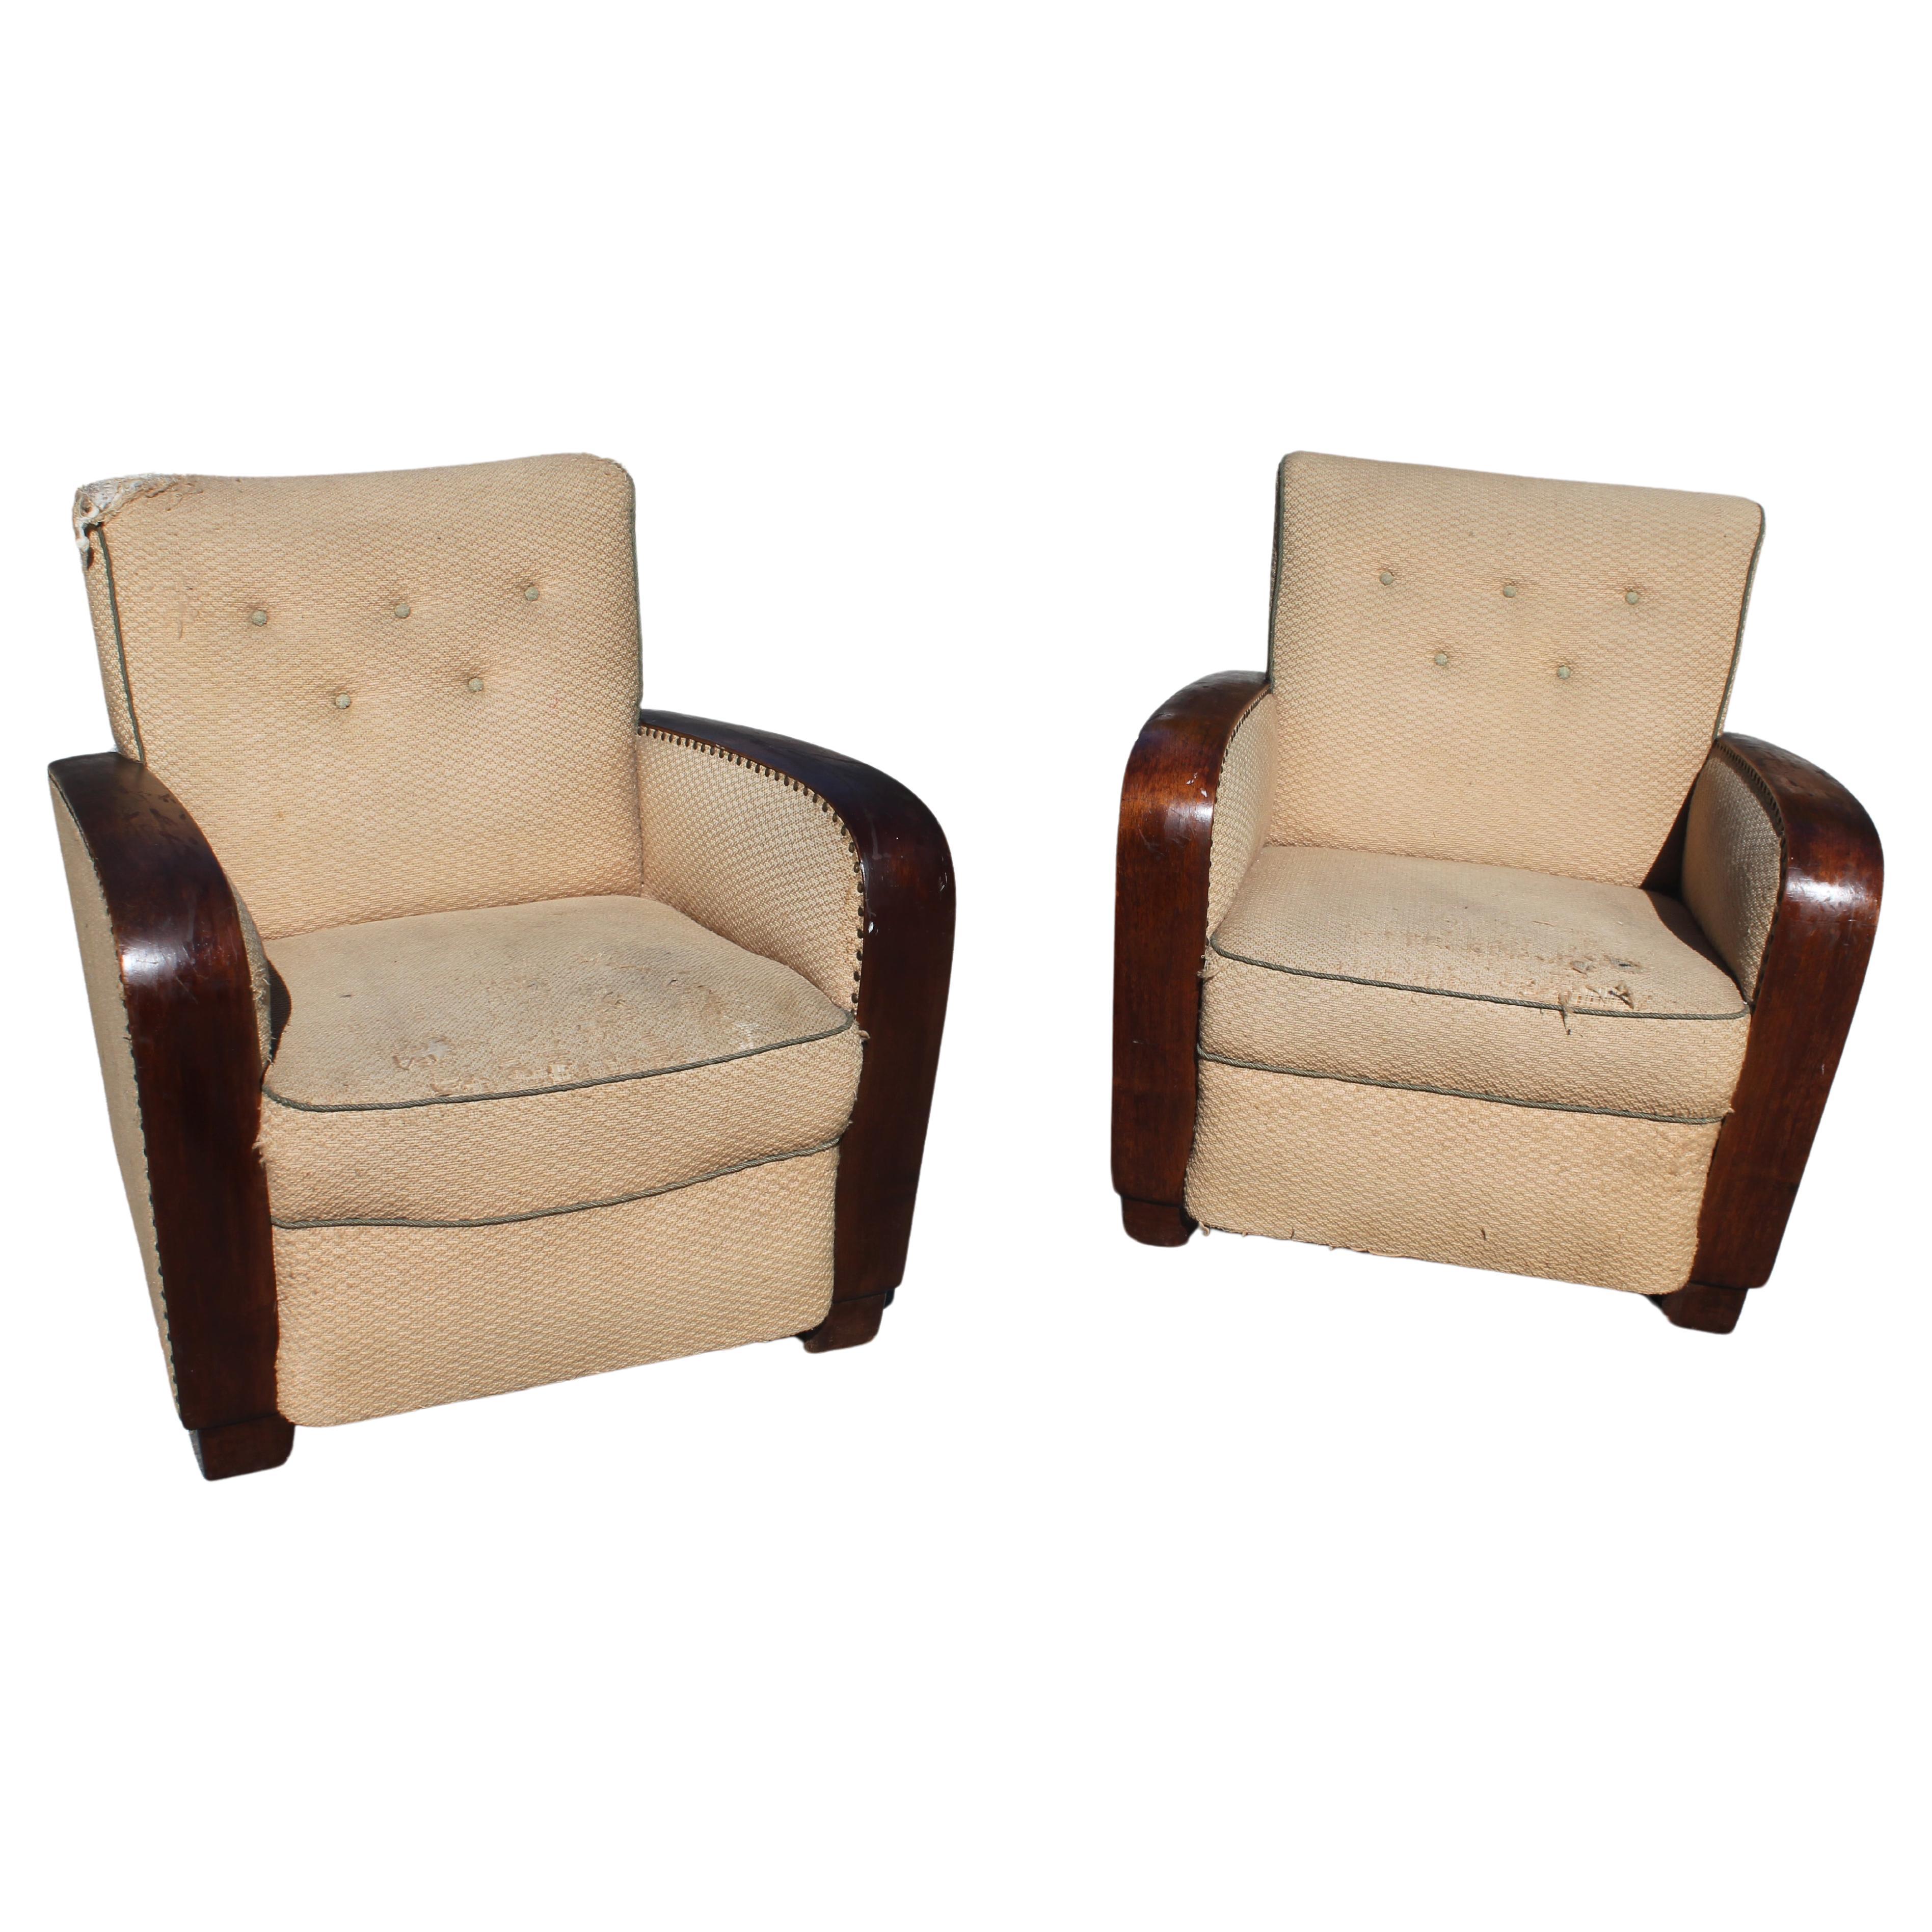 Pair 1930's French Art Deco Classic "Speed" Club Chairs For Sale